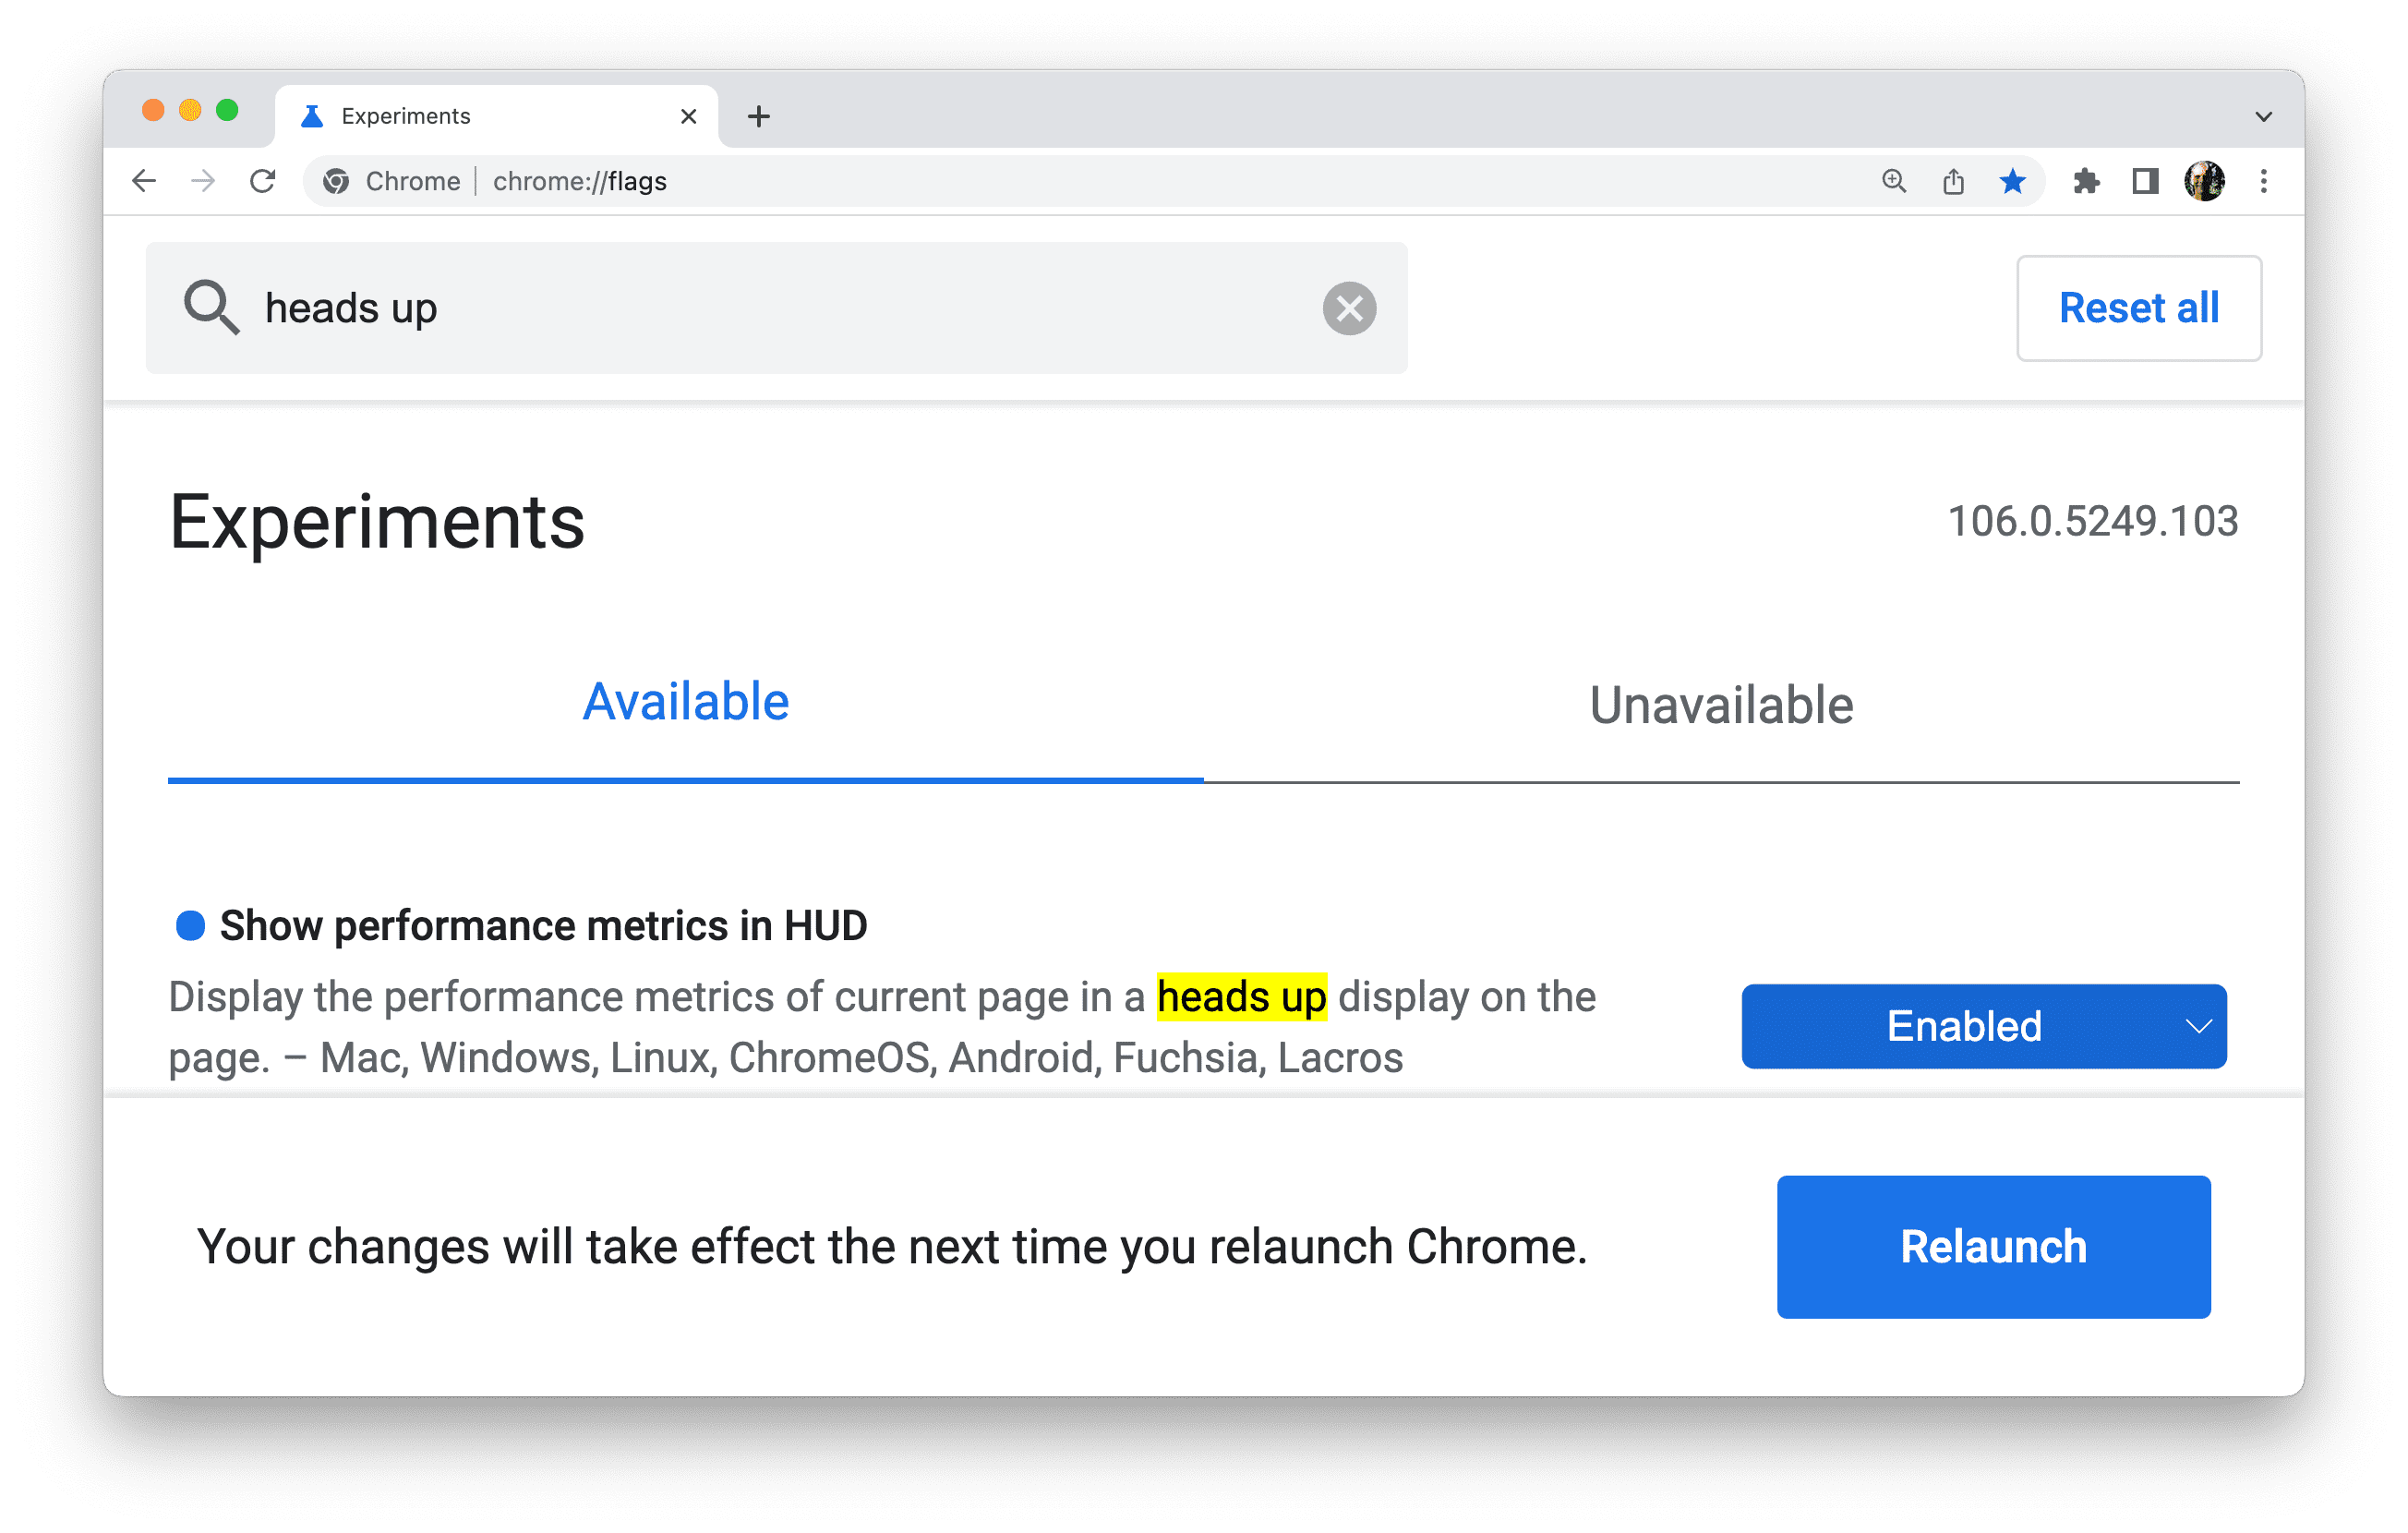 Once you've updated a
flag, Chrome will prompt you to relaunch the browser..